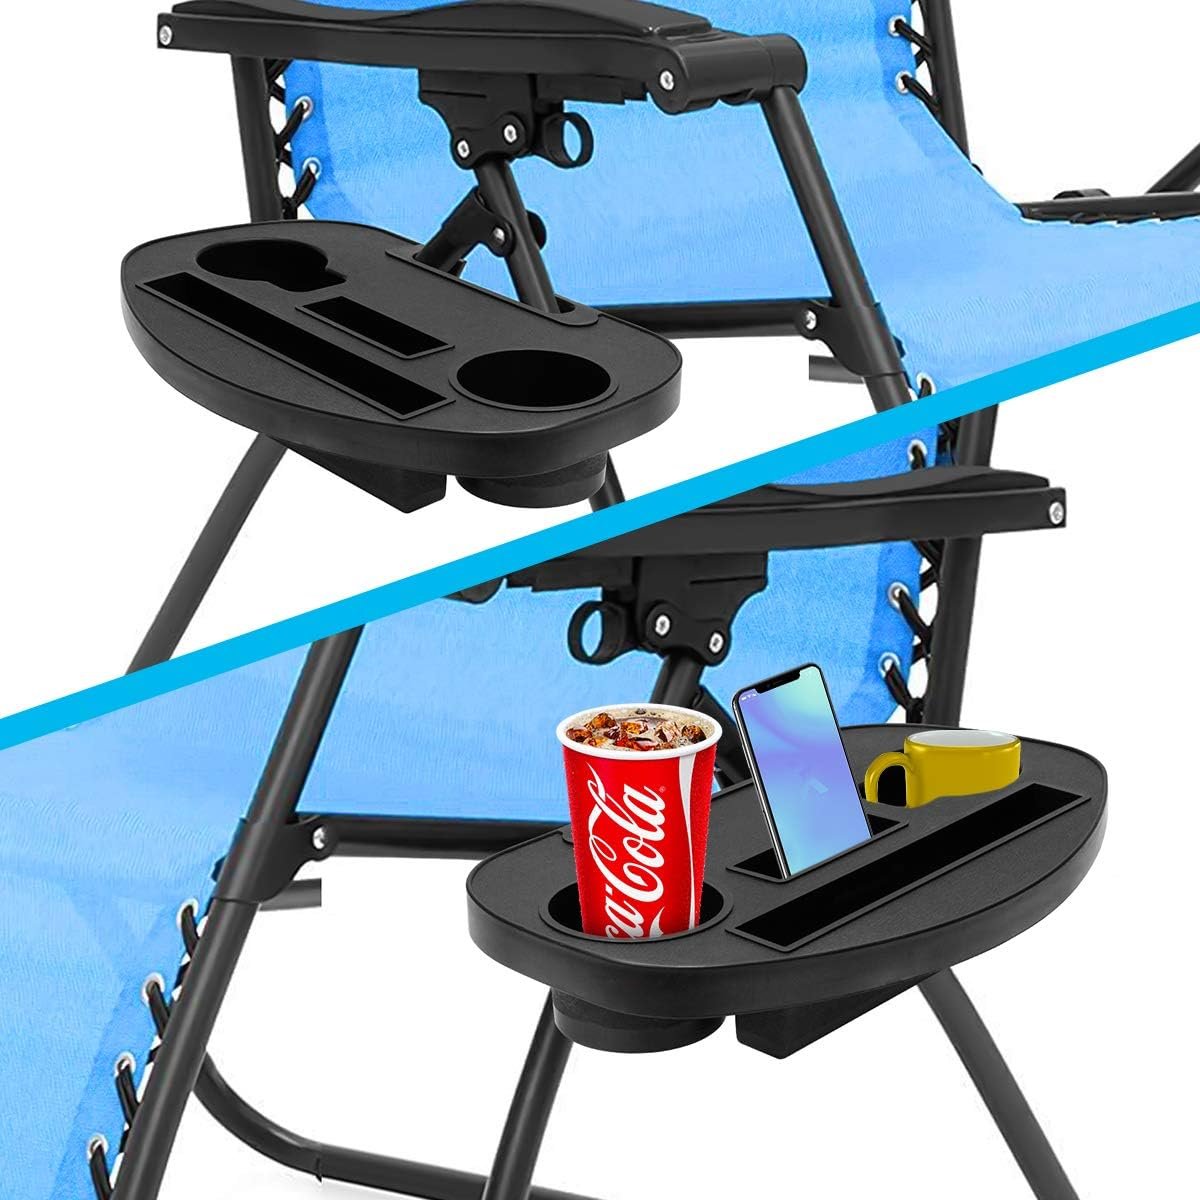 Coolrunner Zero Gravity Chair Cup Holder Review